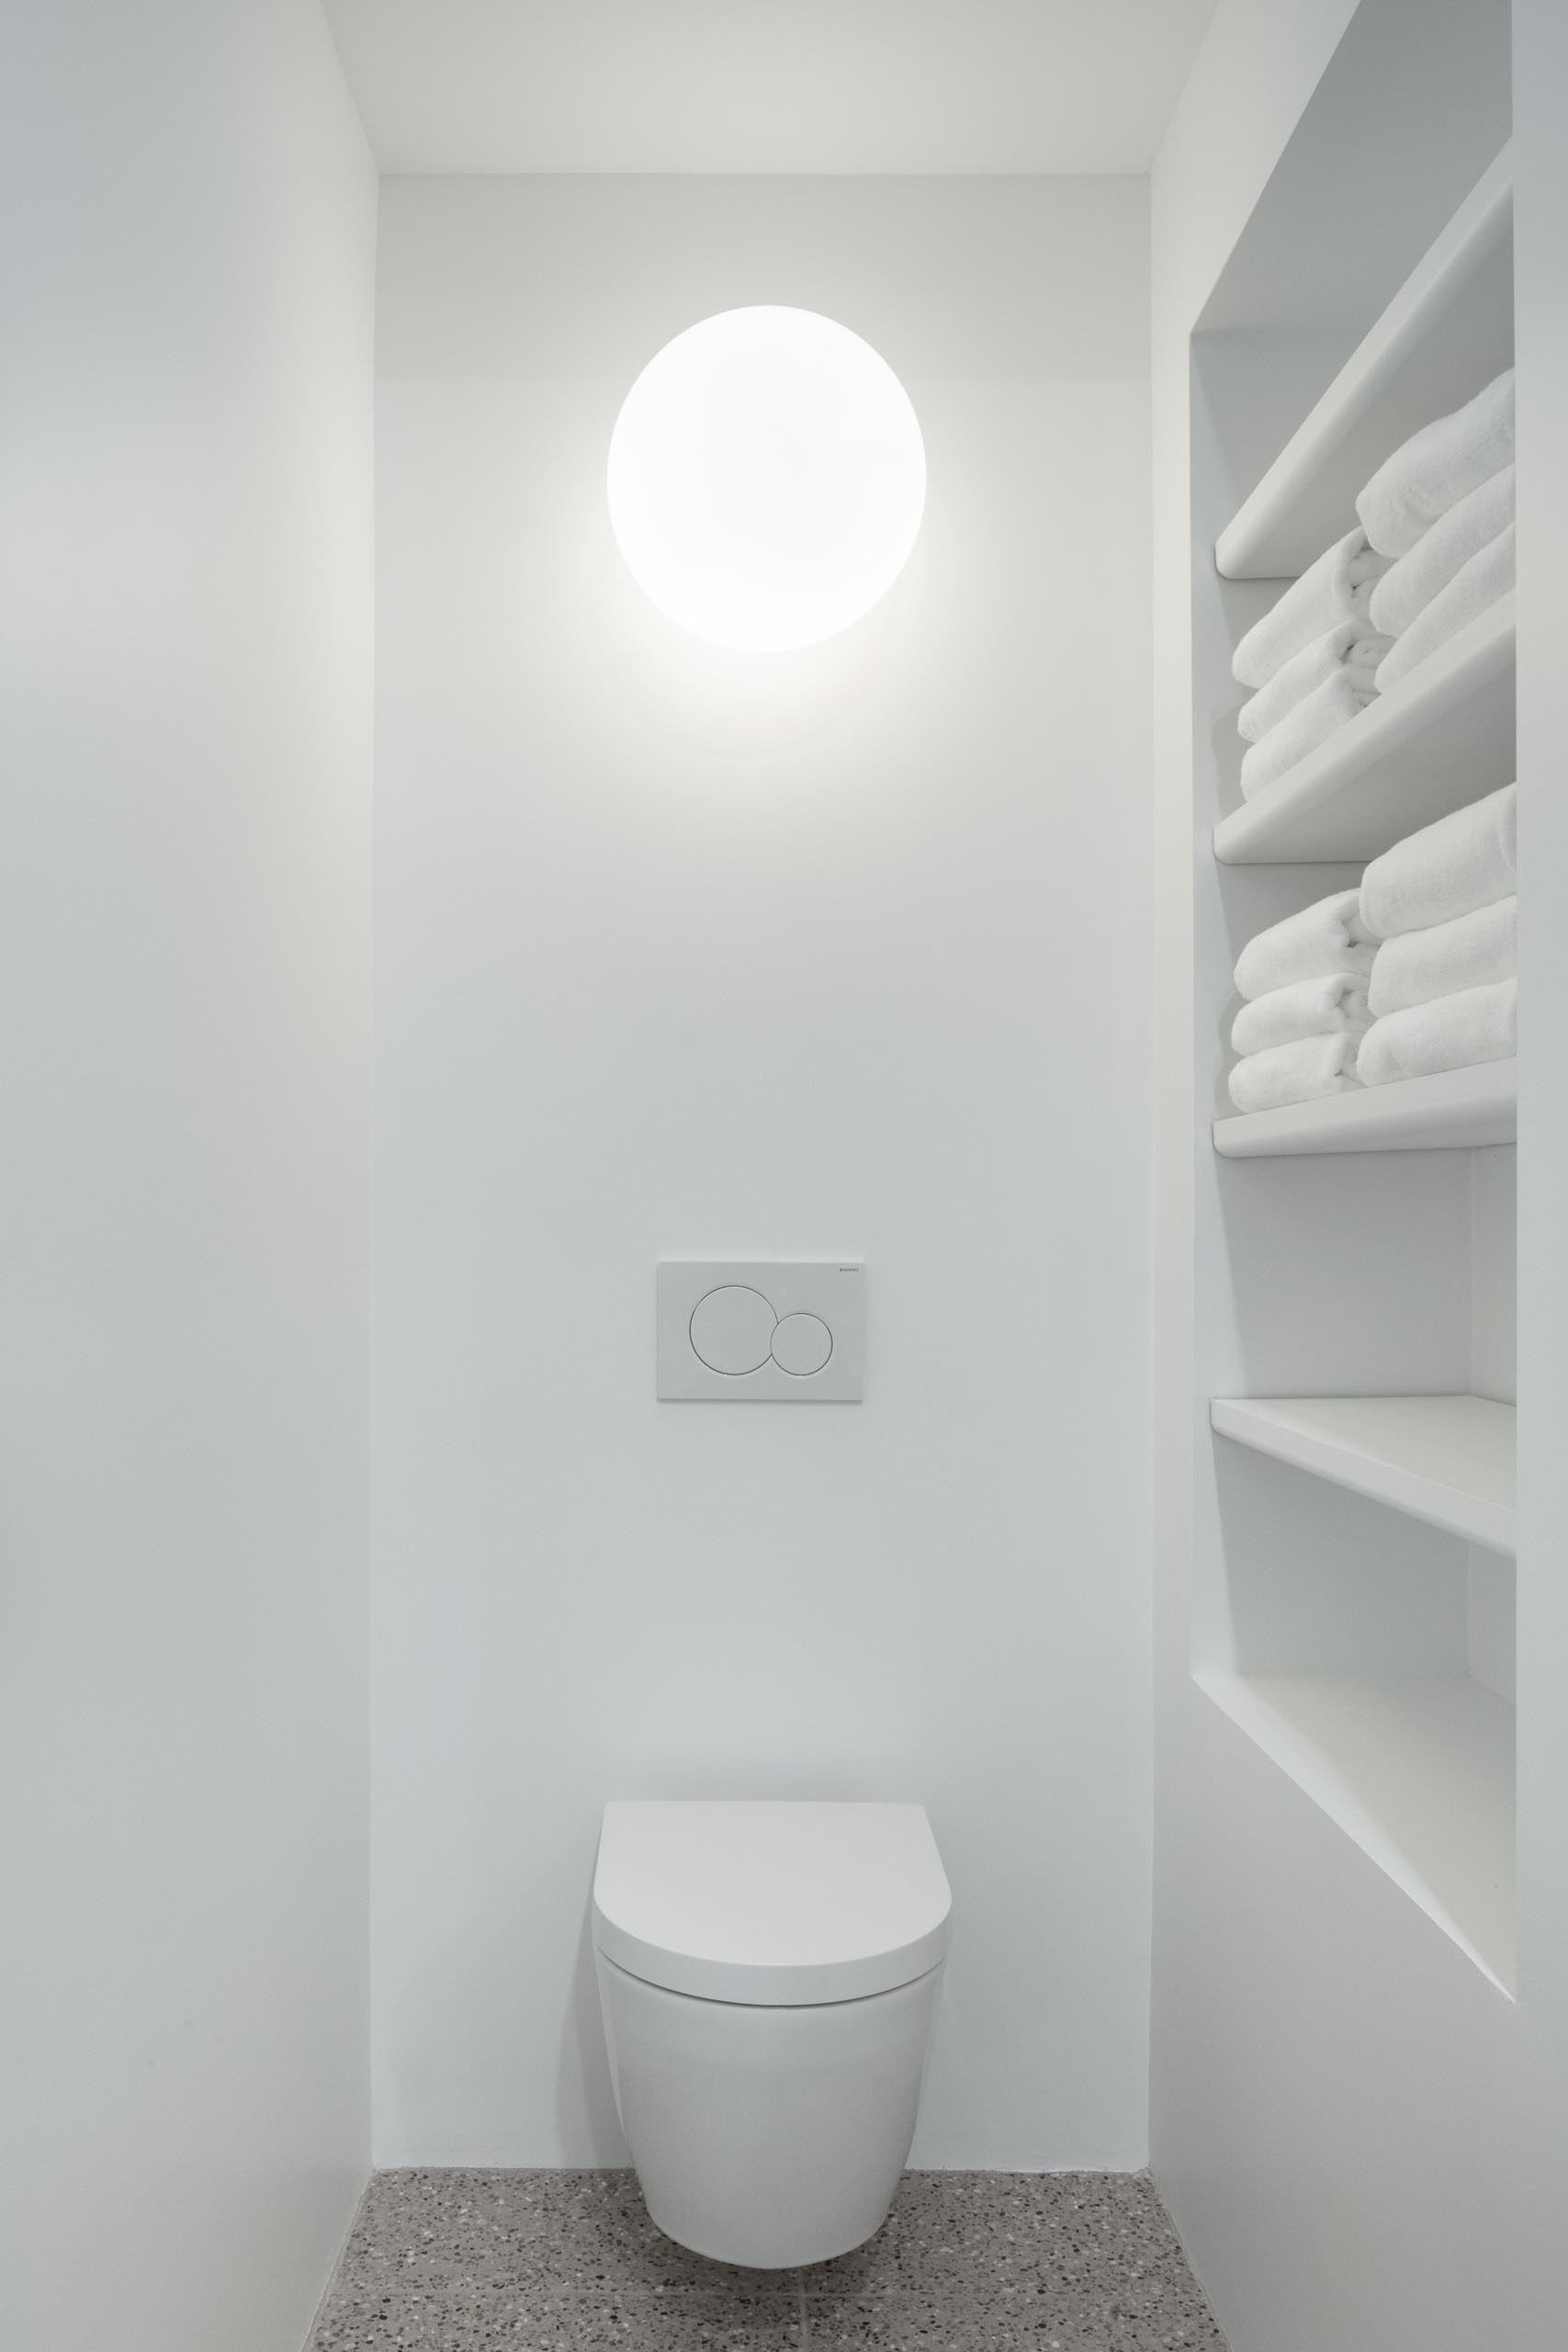 A modern white bathroom with a built-in shelving niche.